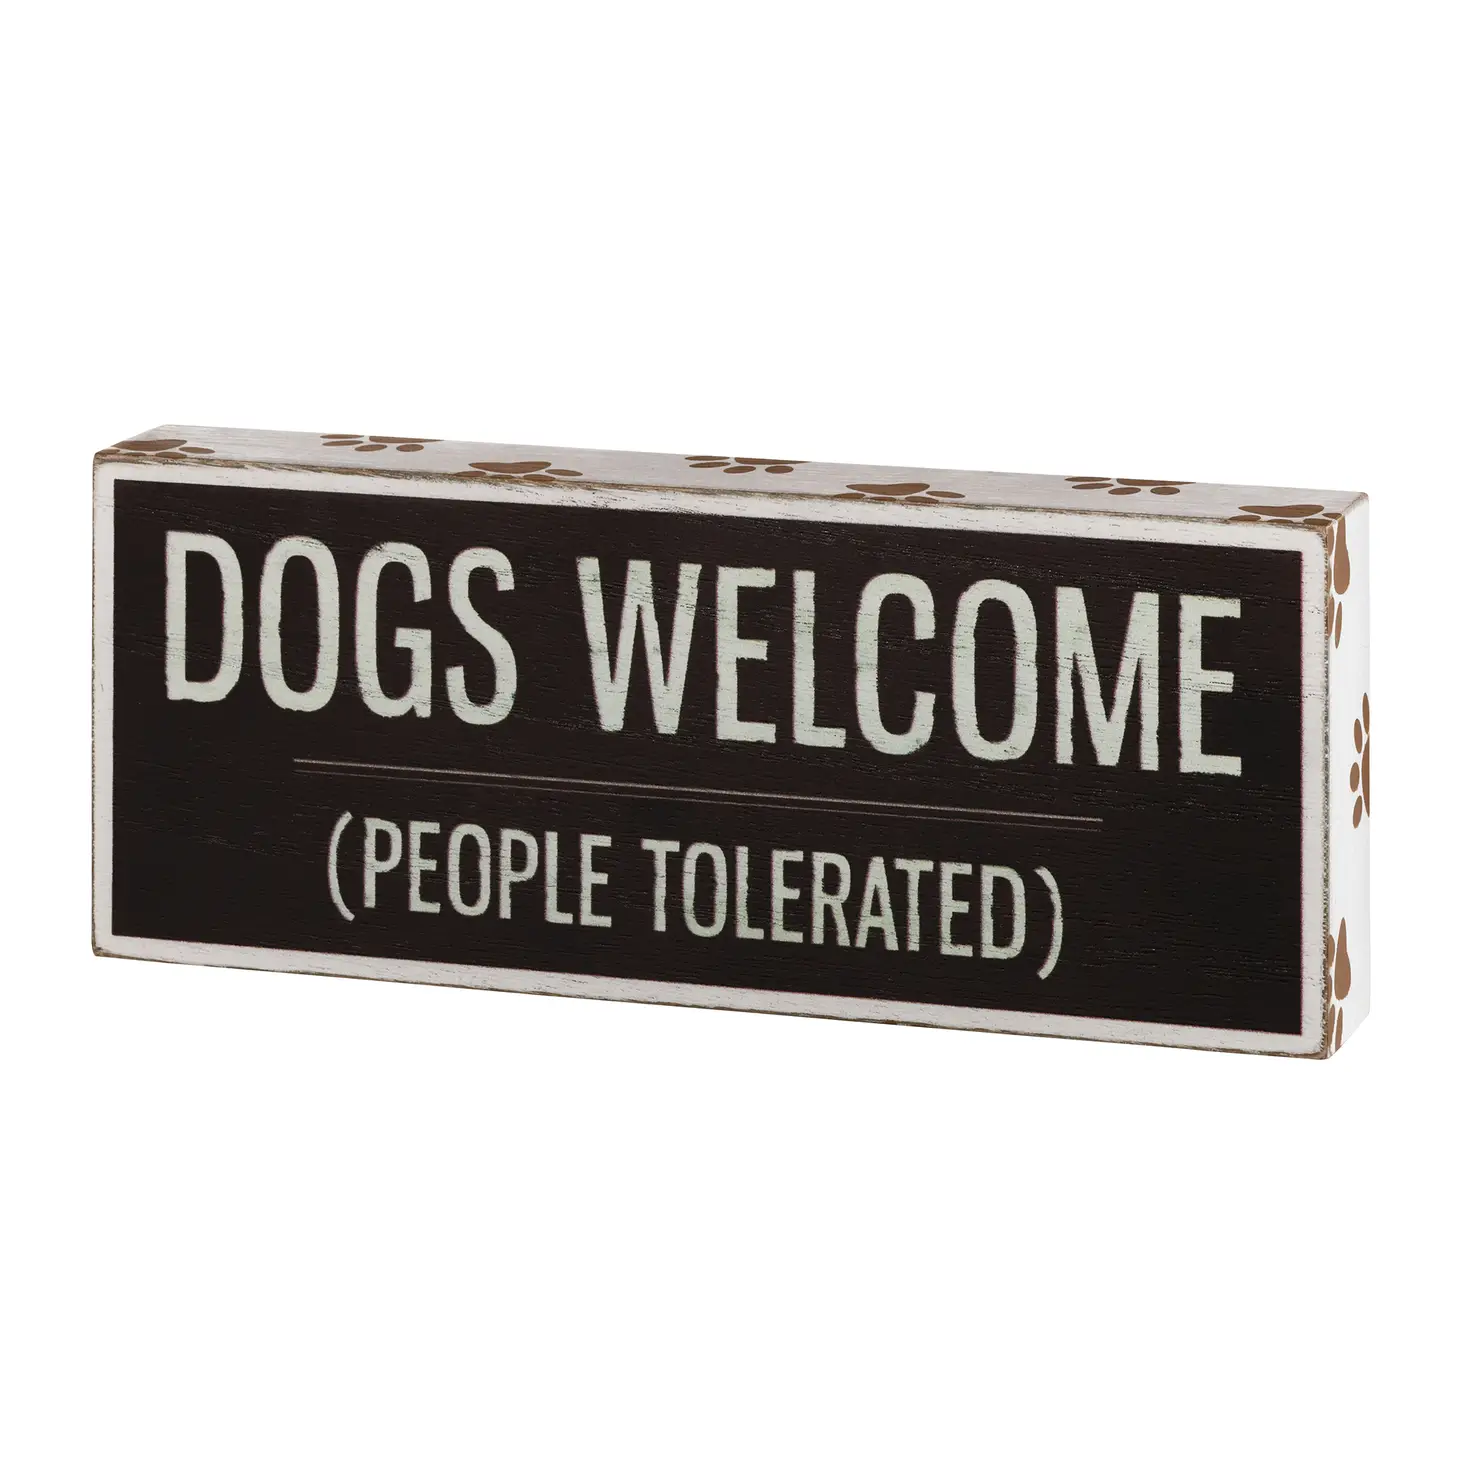 Dogs Welcome, People Tolerated Box Sign